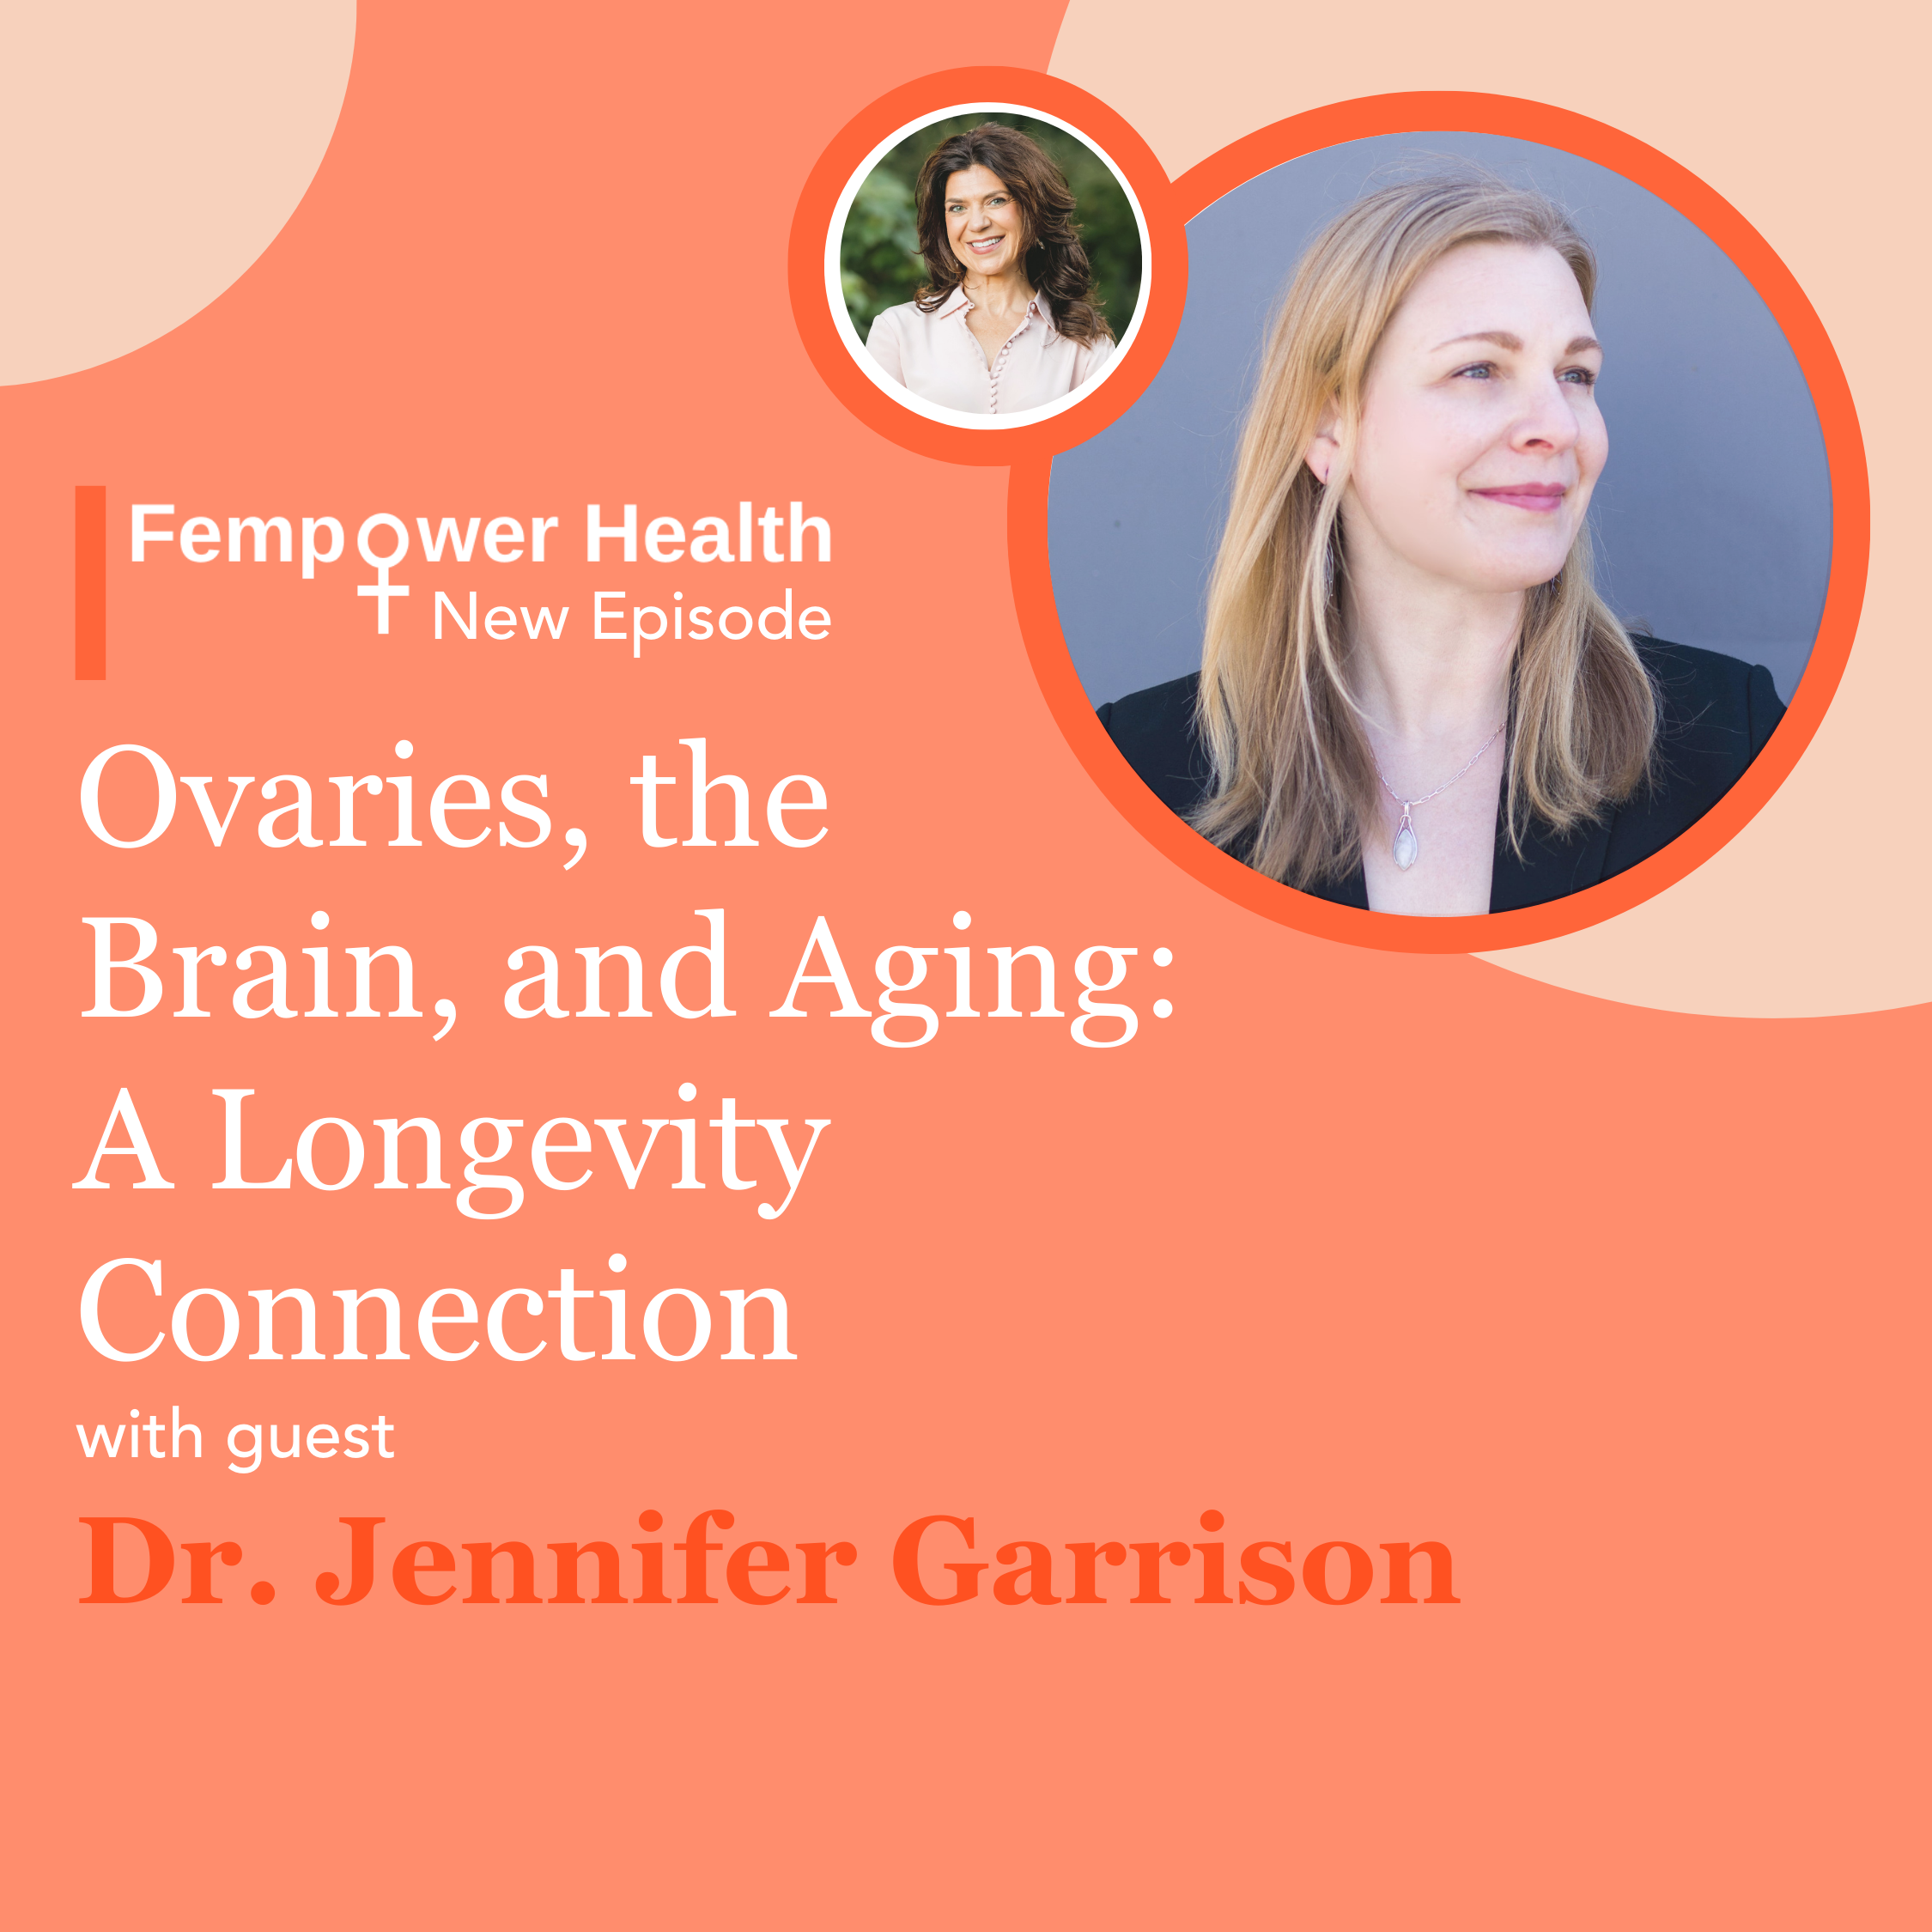 Ovaries, the Brain, and Aging: A Longevity Connection | Dr. Jennifer Garrison